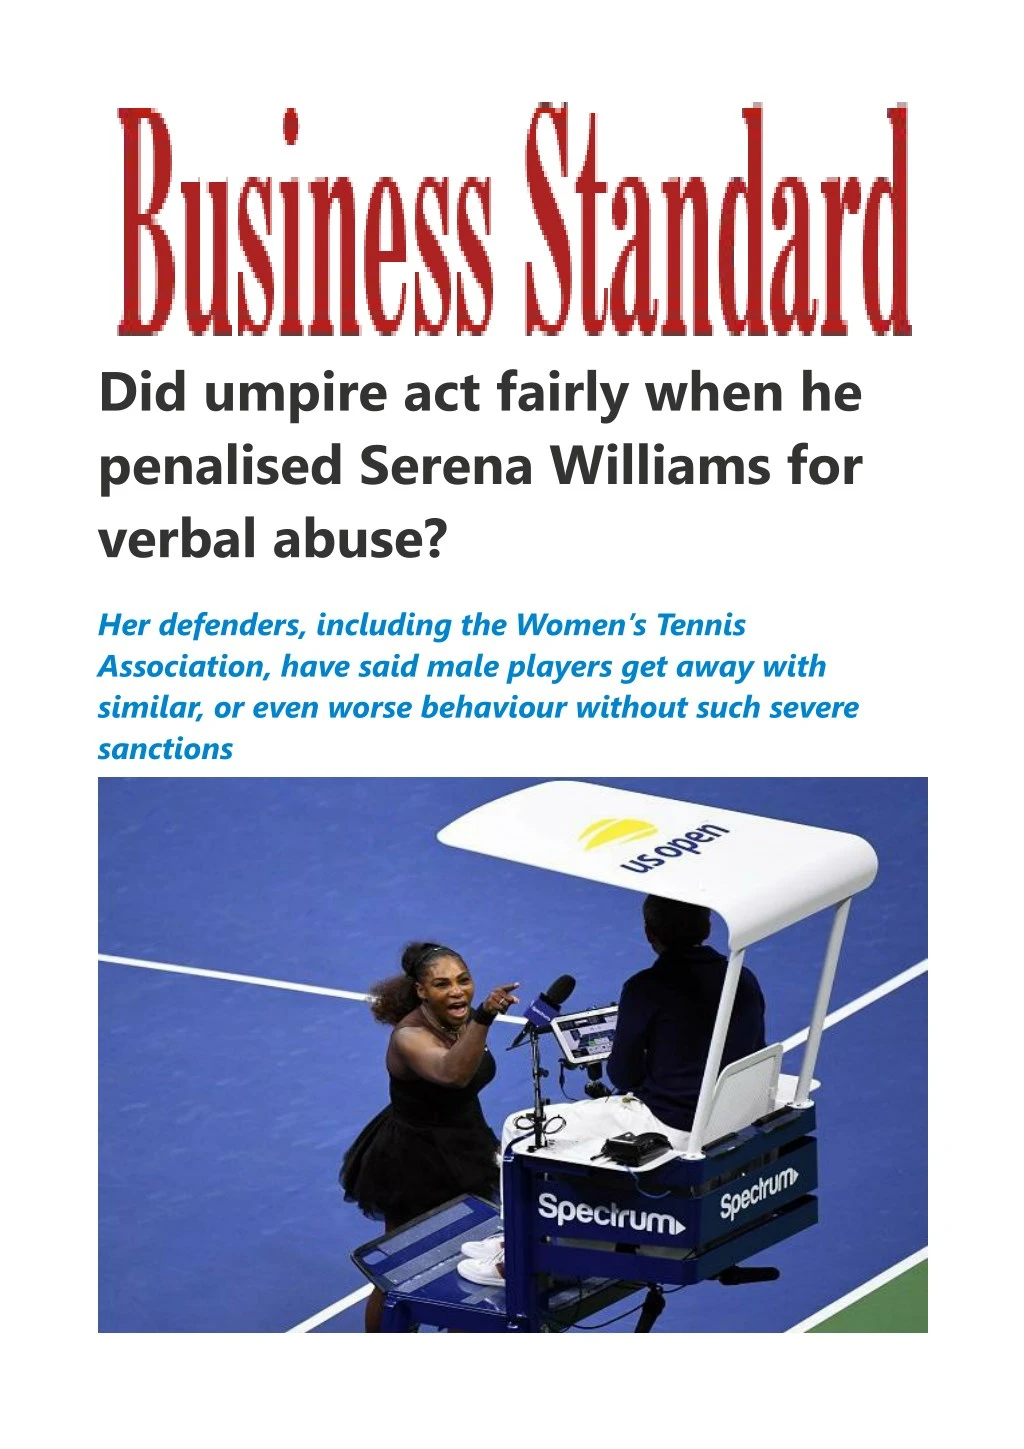 did umpire act fairly when he penalised serena